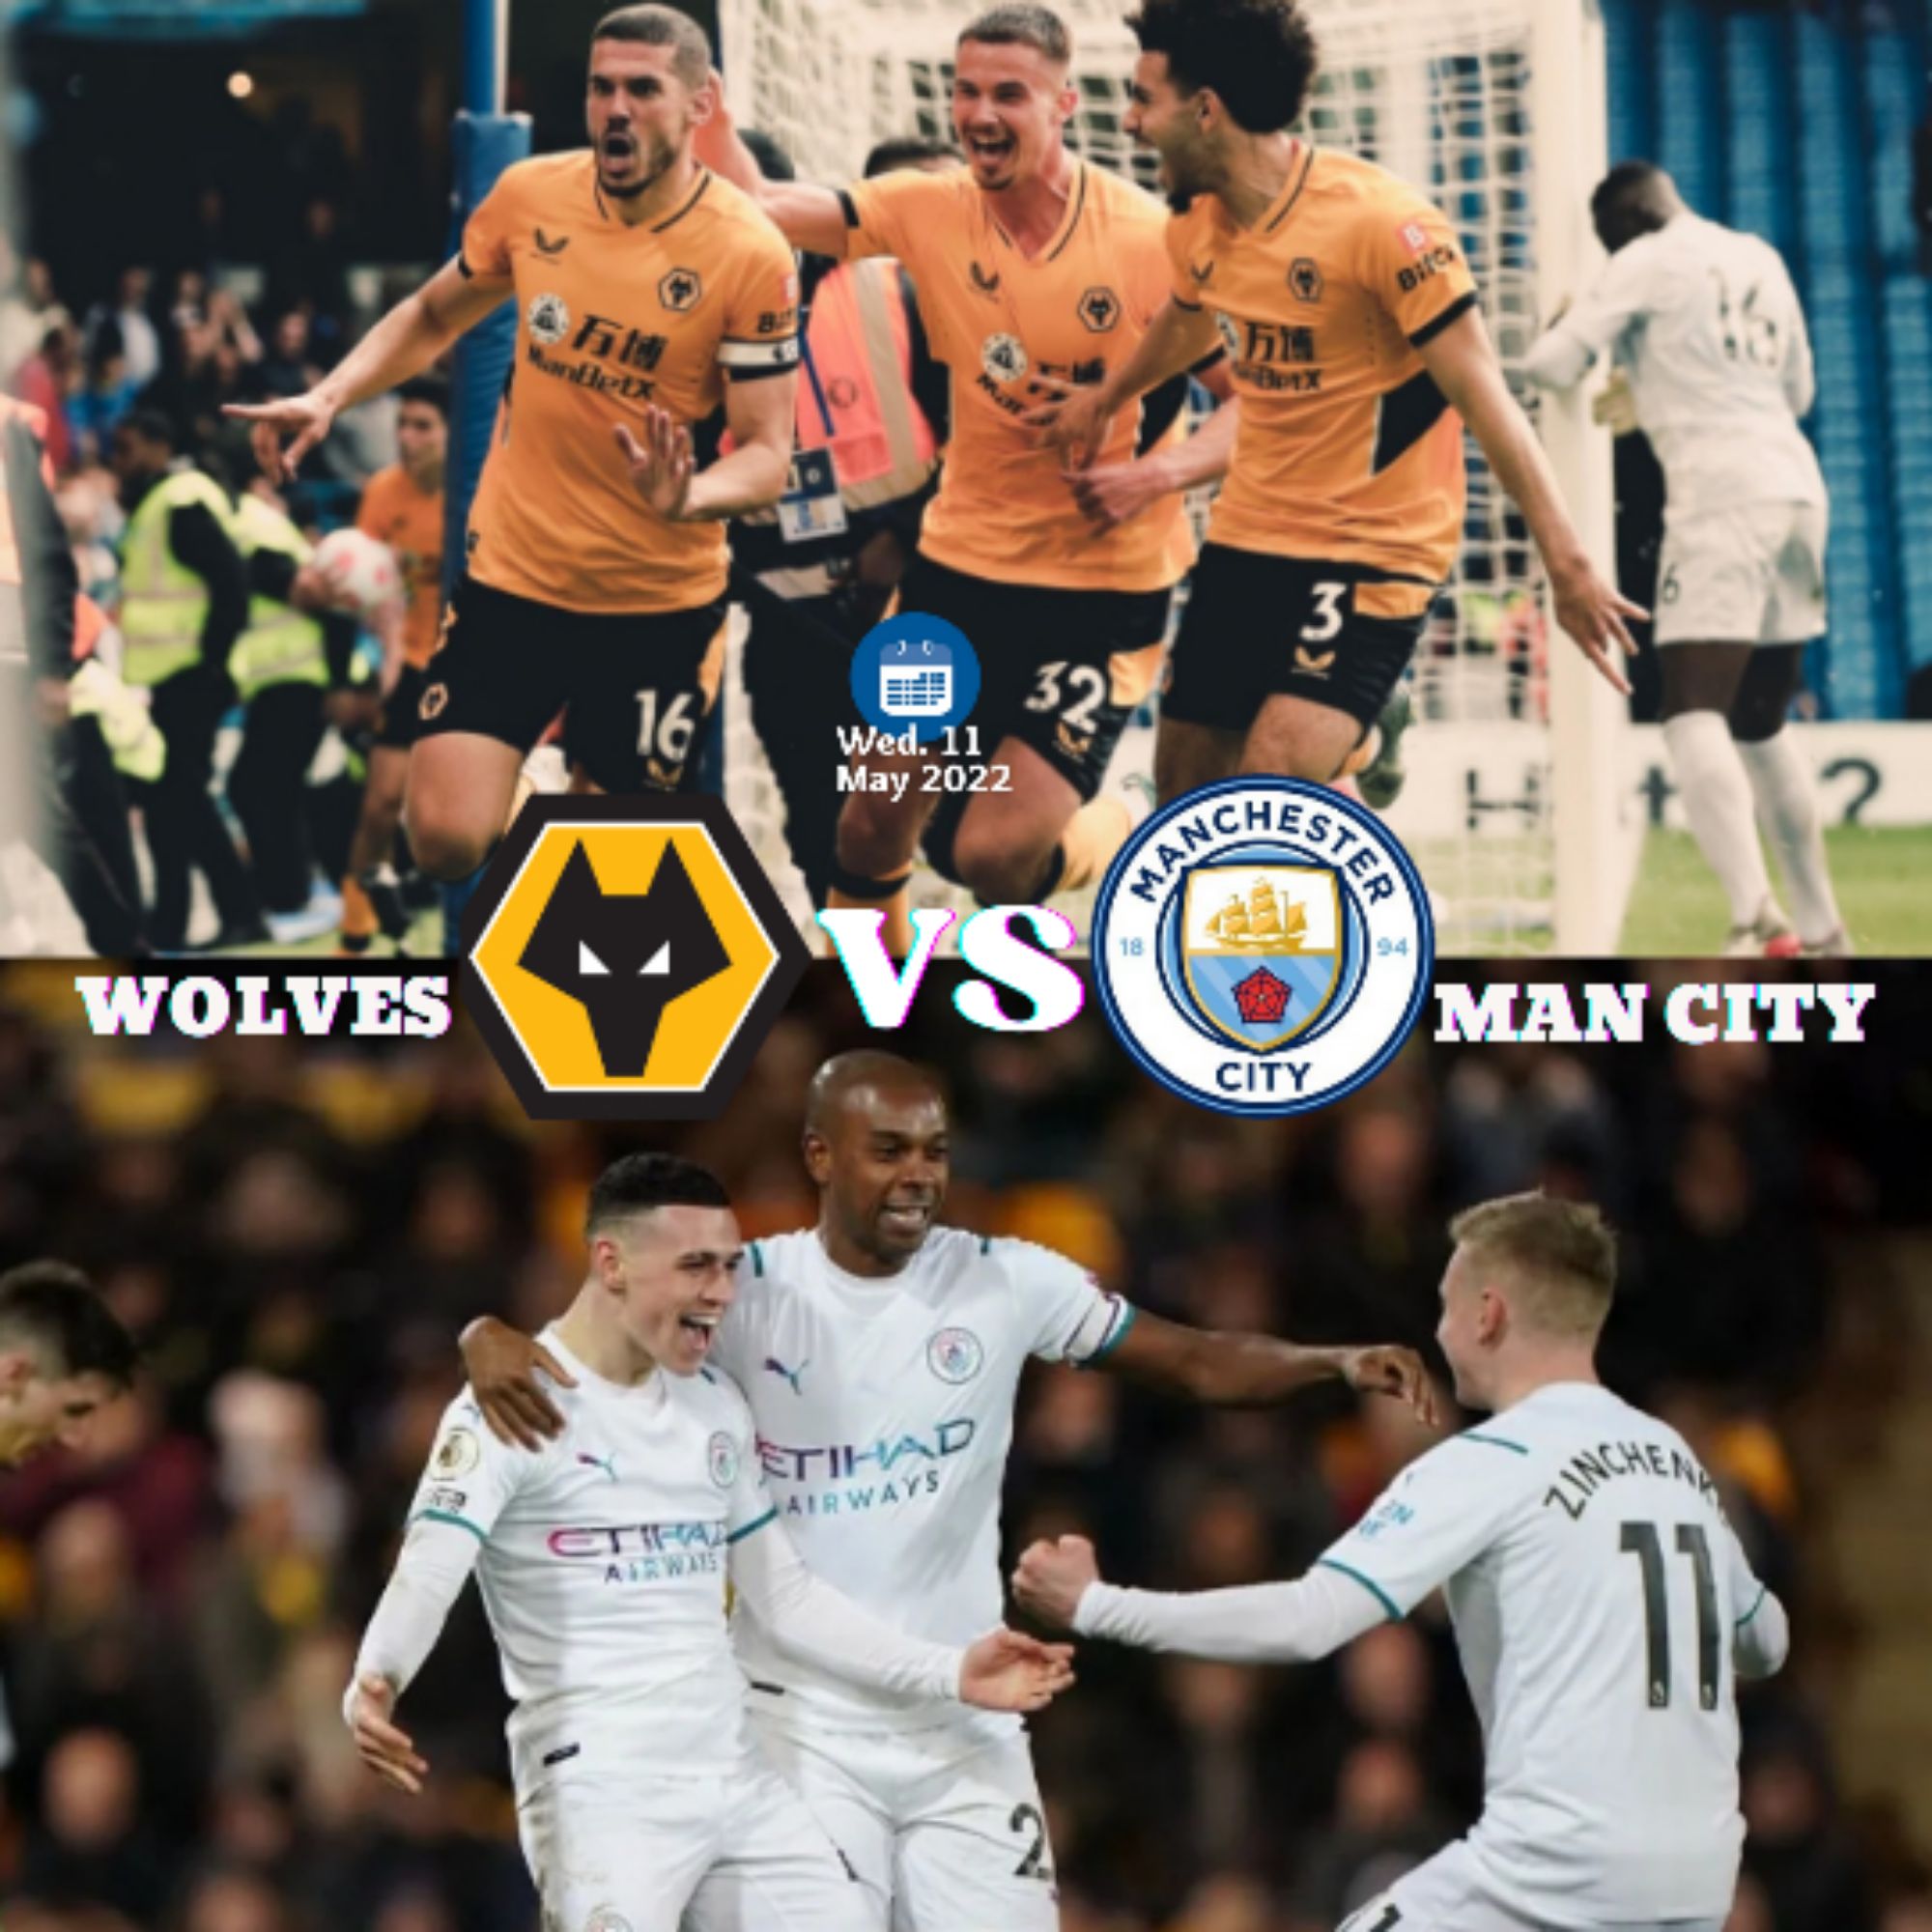 Wolves vs Man City – Preview And Predictions